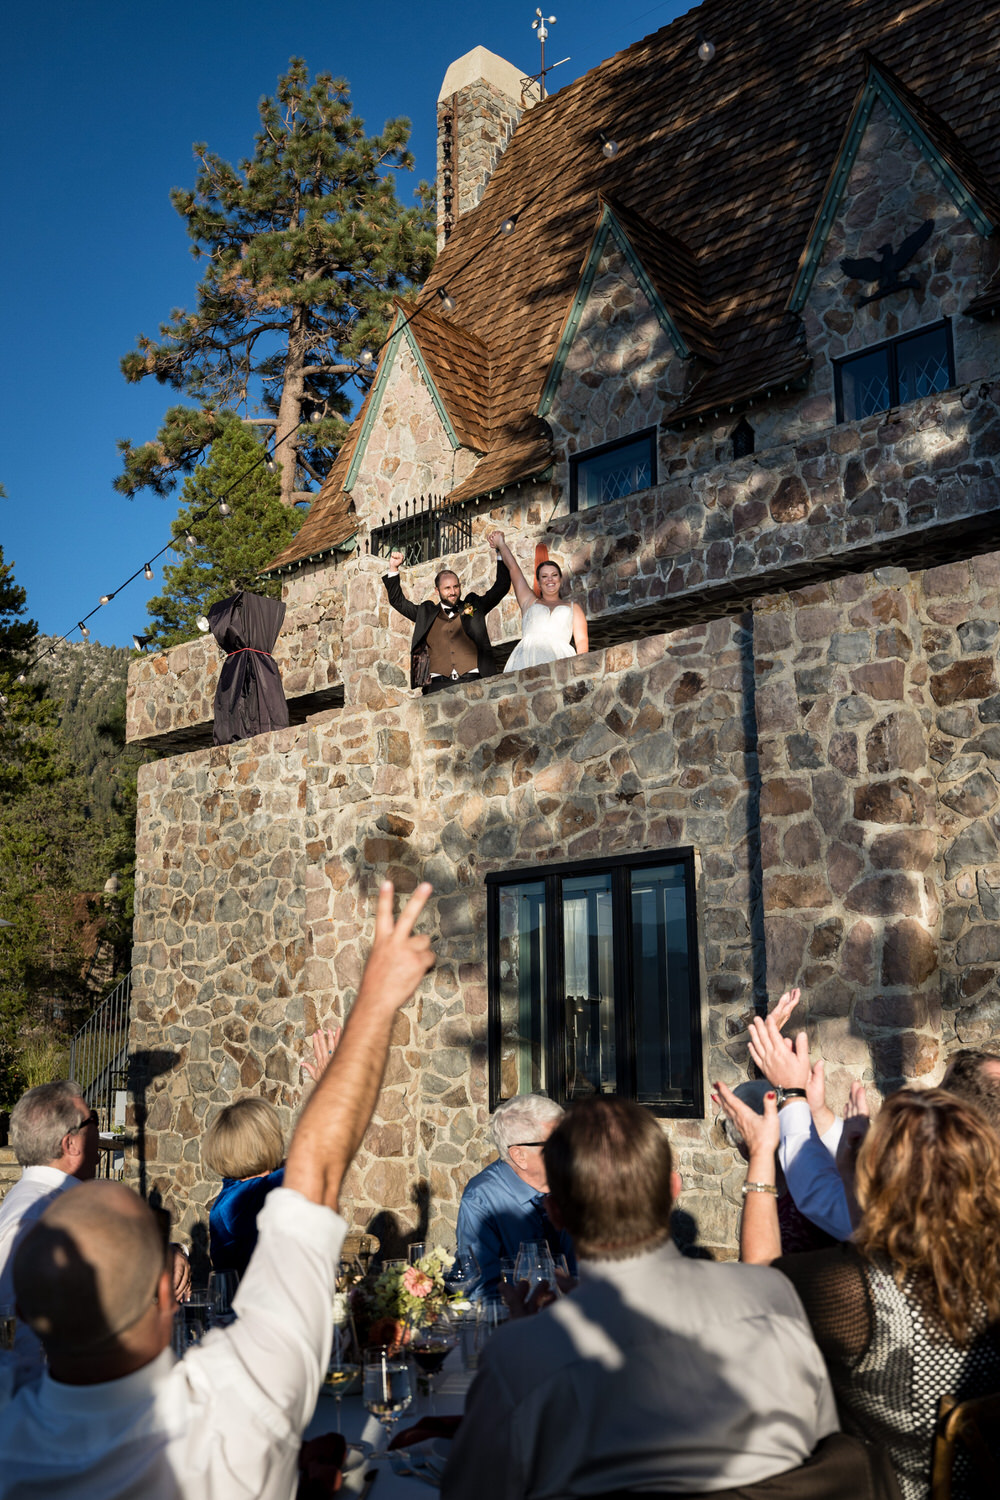 The bride and groom make their grand entrance to their Thunderbird Lodge wedding reception from the balcony and guests cheer from the lawn below.